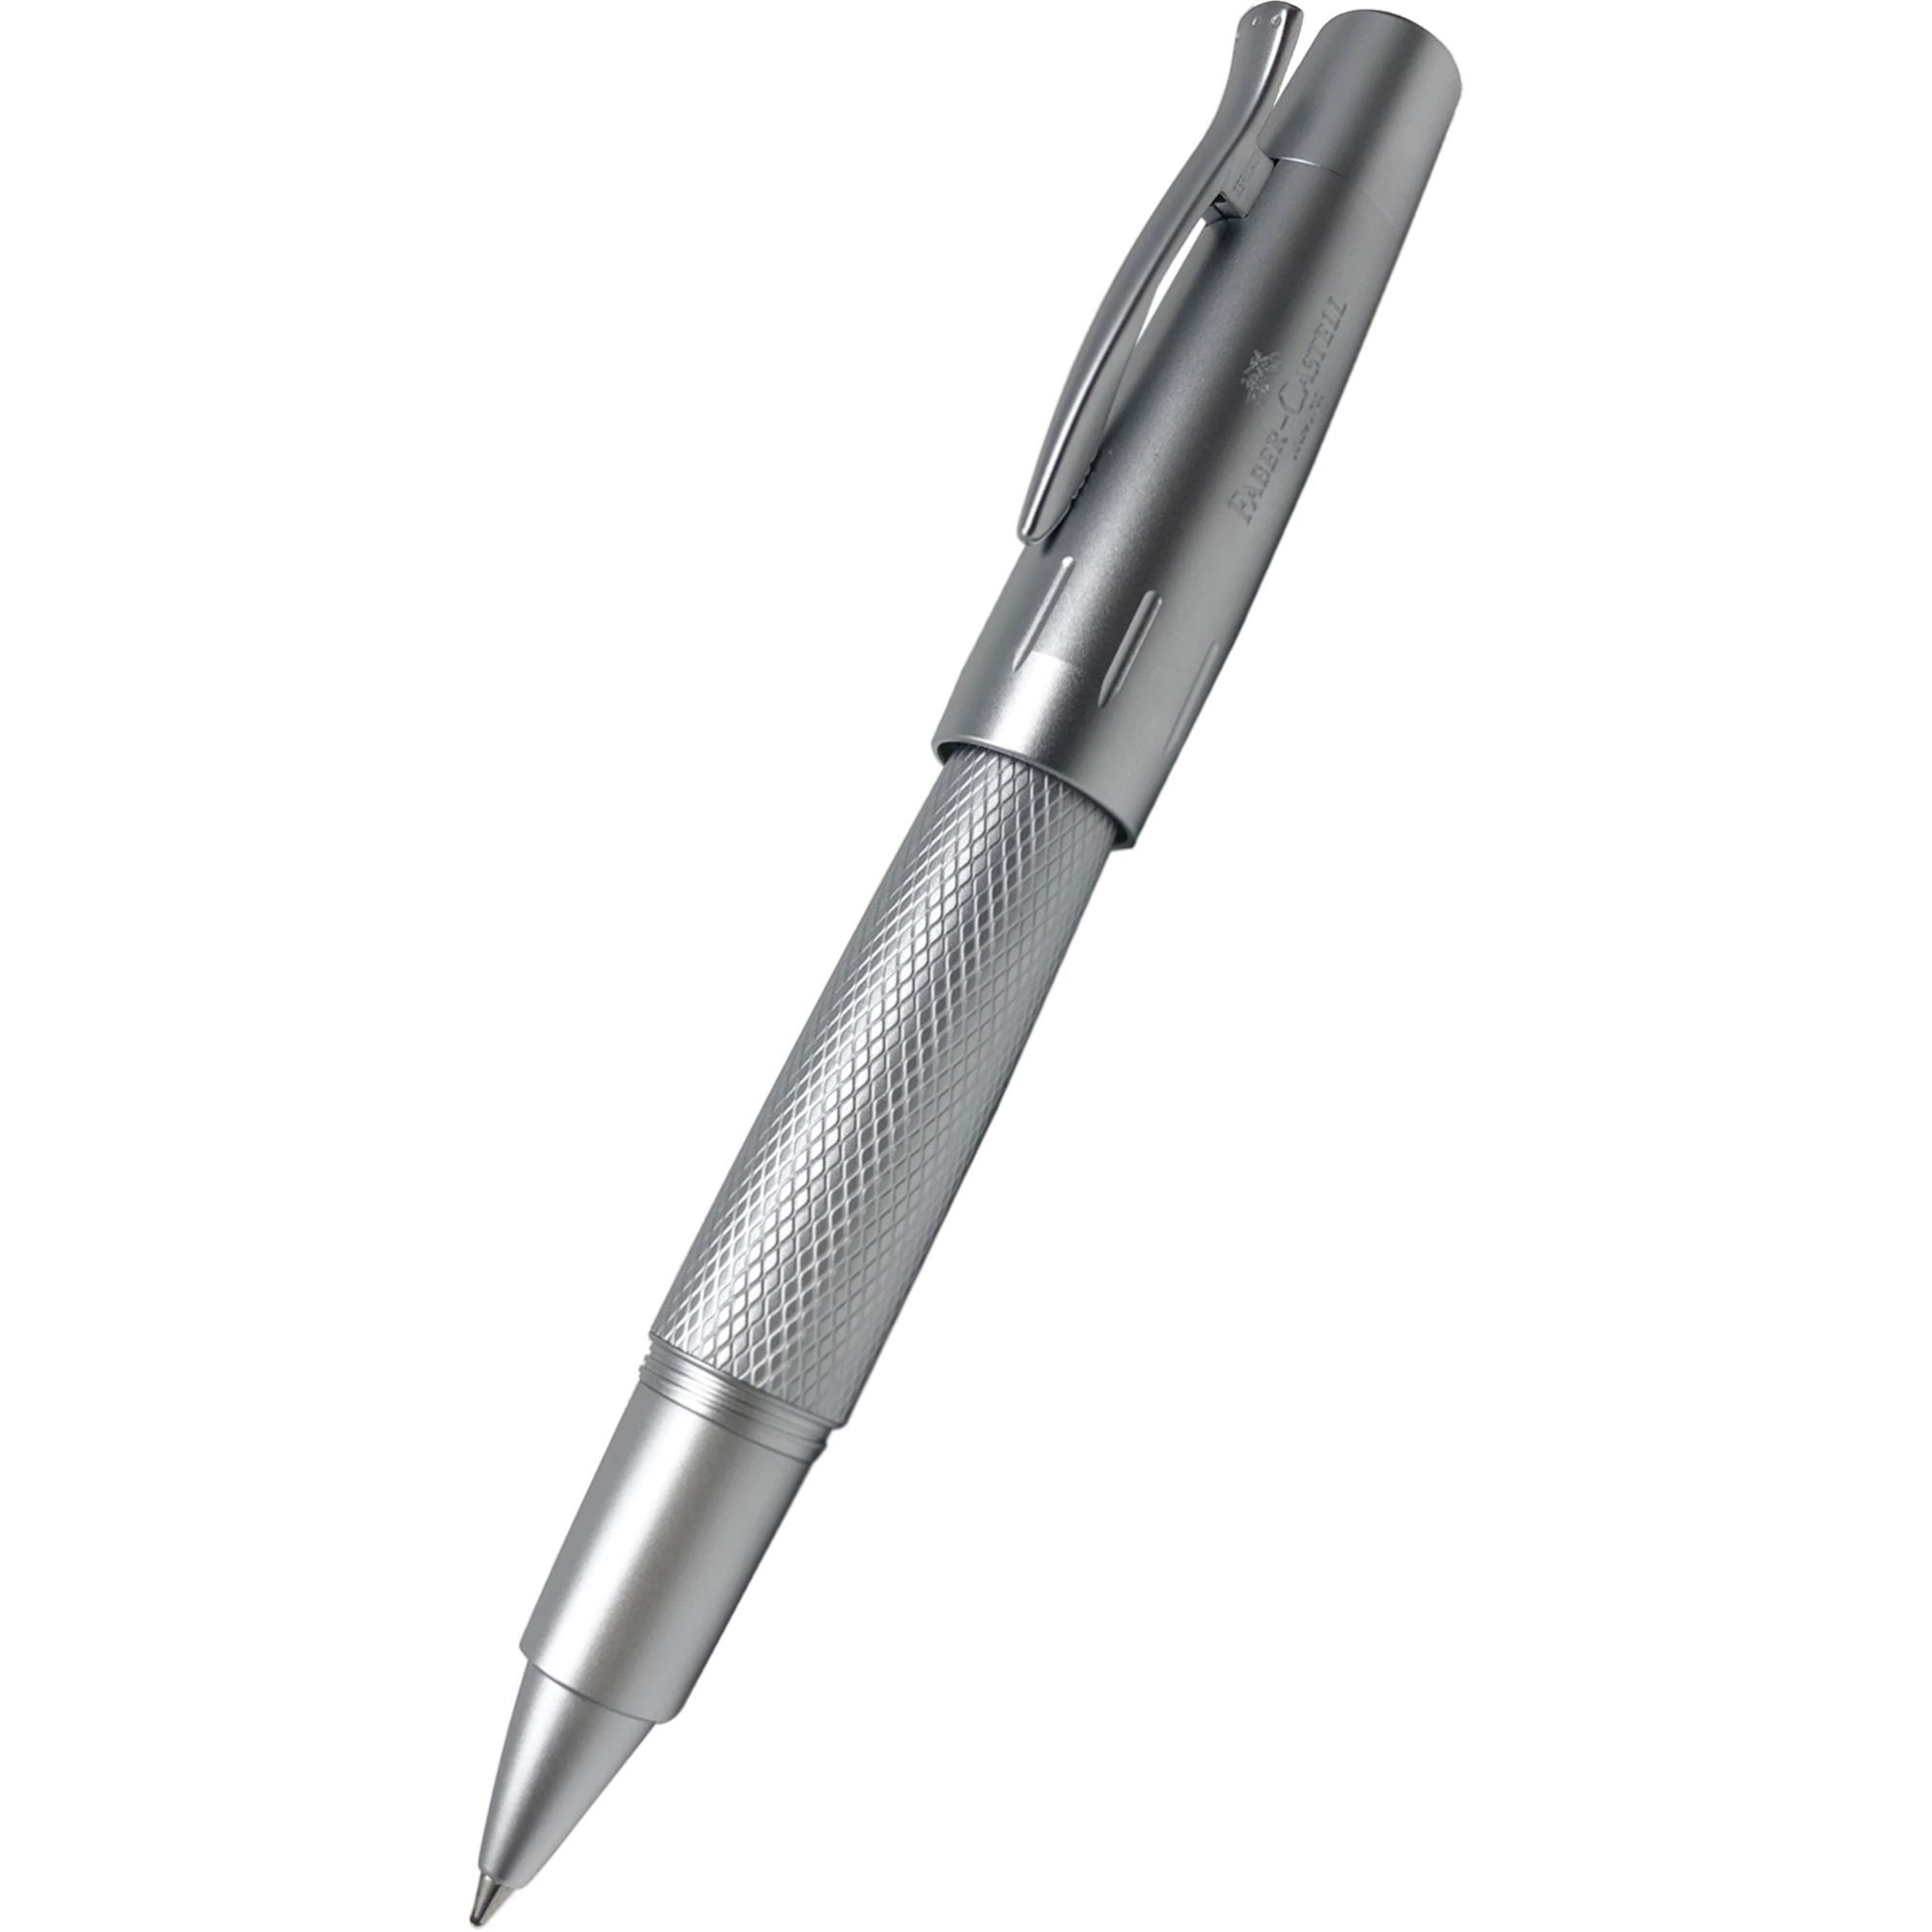 Faber-Castell E-Motion Rollerball Pen - Pure Silver